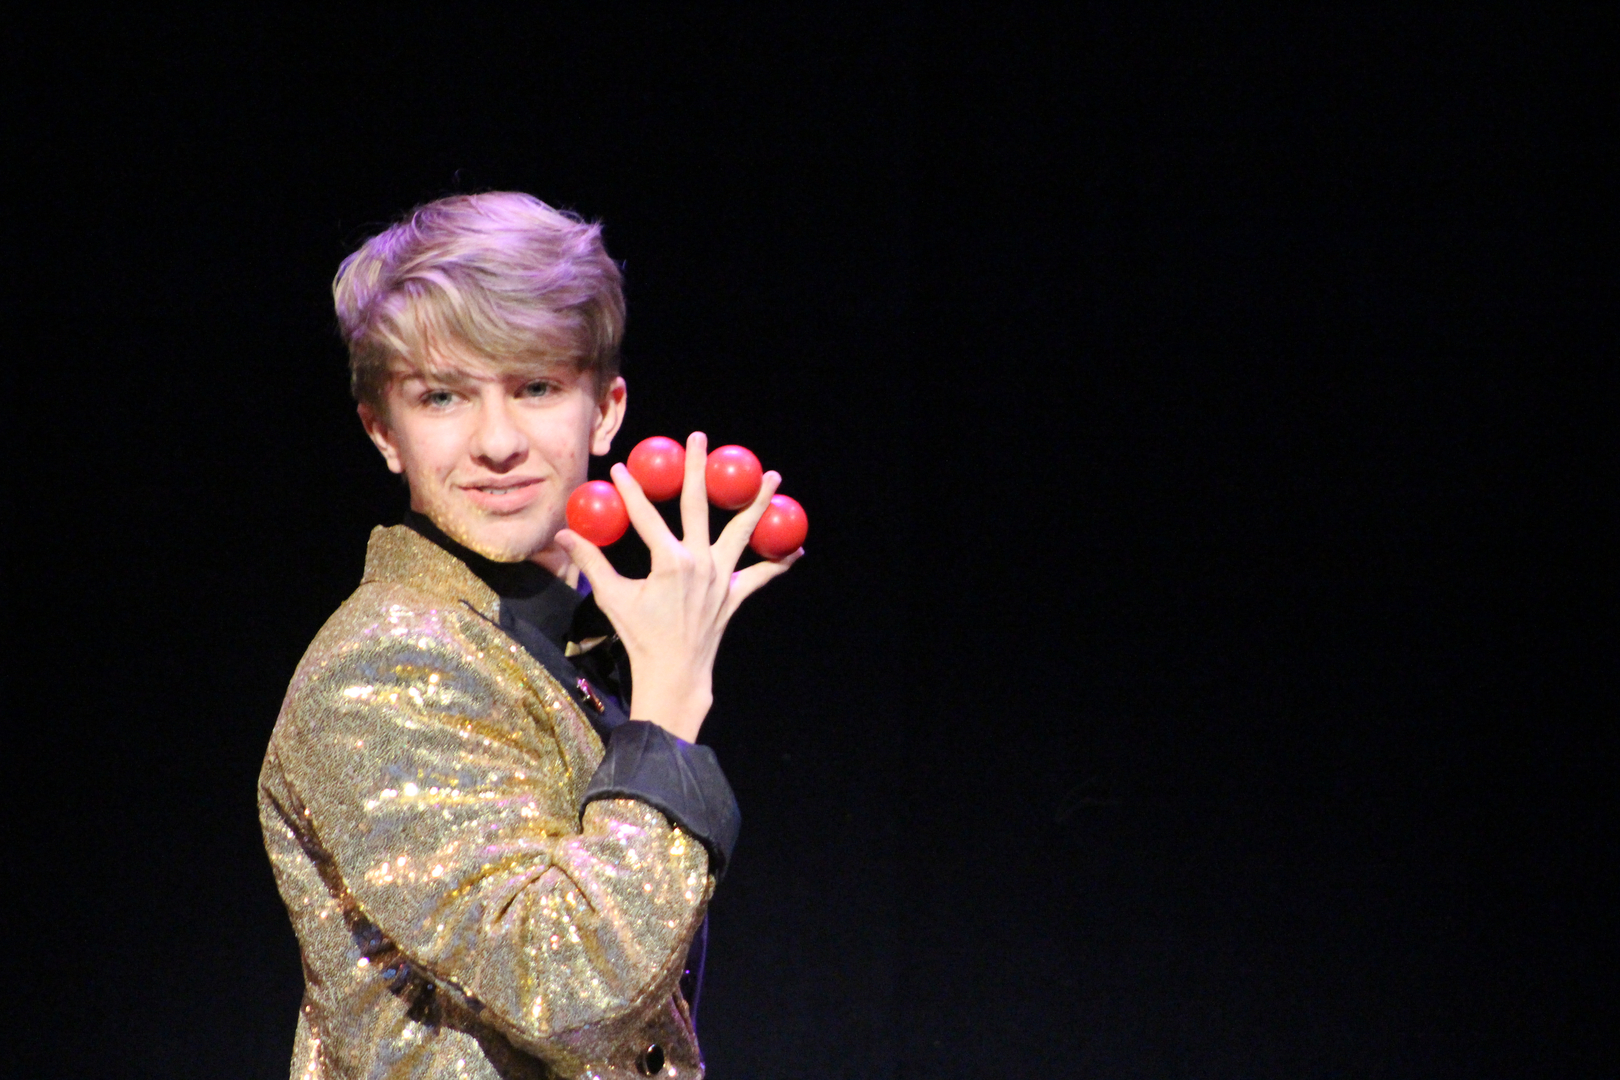 A young man in a gold suit holding two red apples.